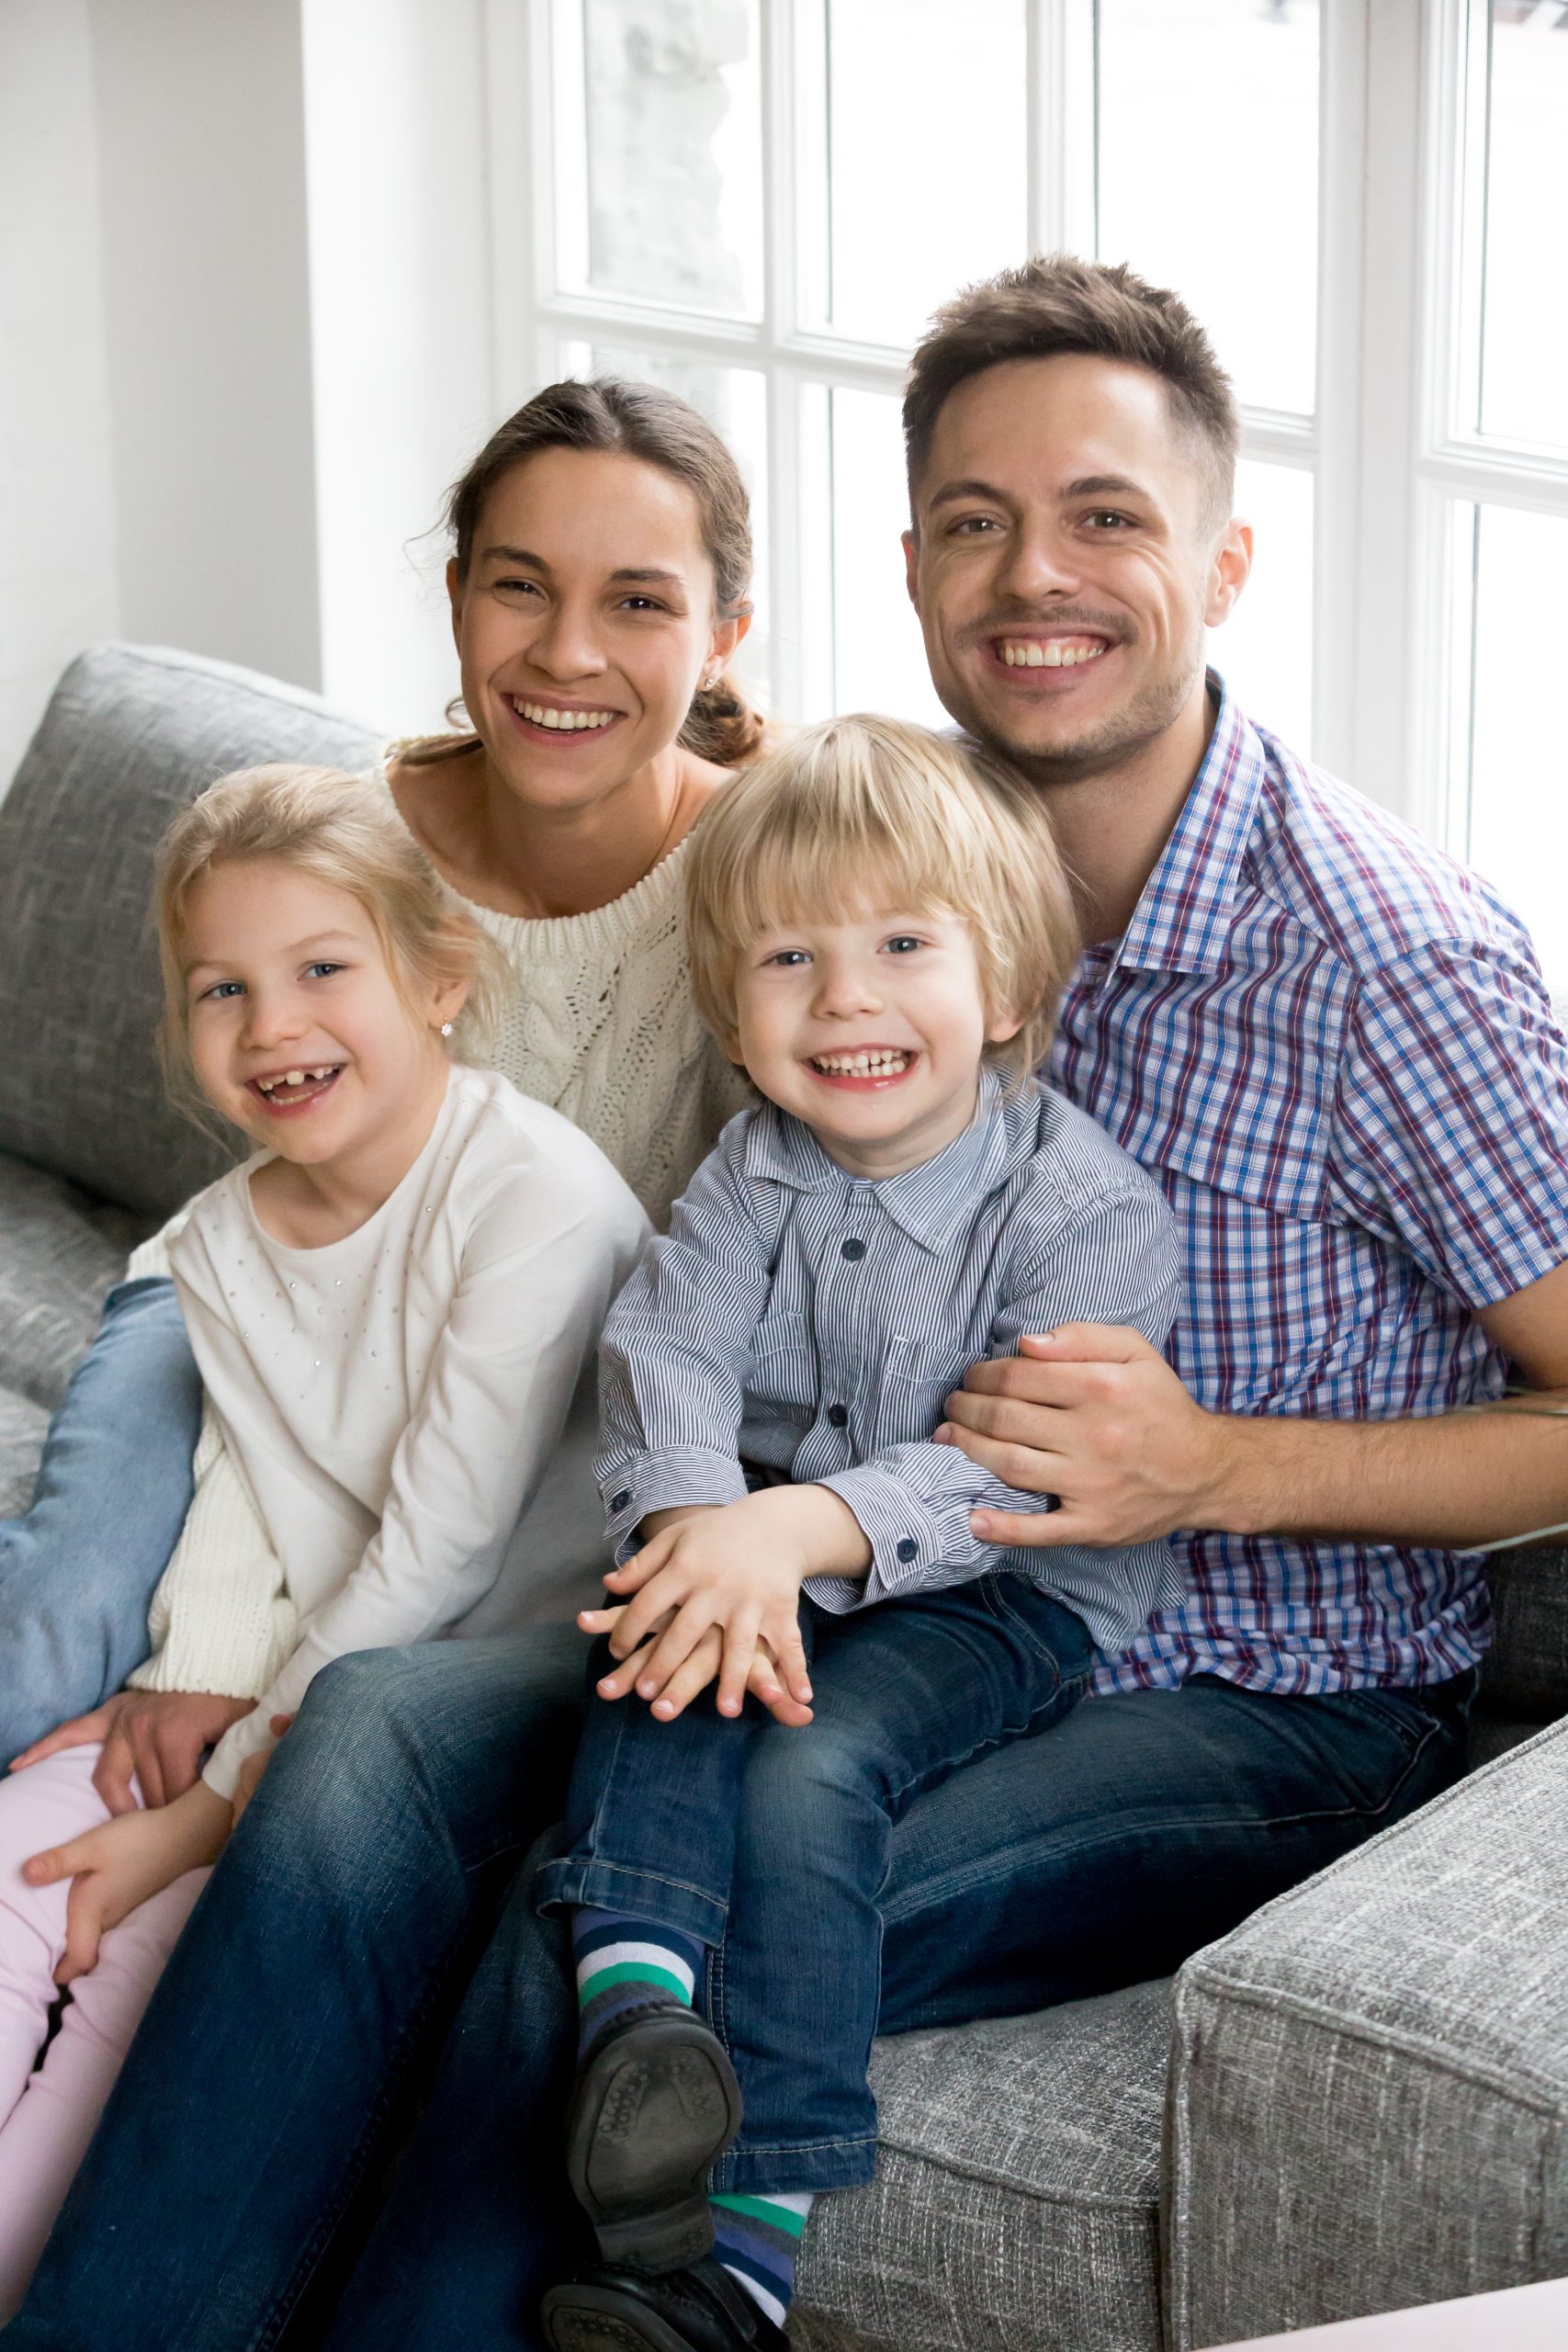 New happy parents for two adopted kids siblings concept, smiling couple posing with daughter and son sitting on sofa together, cheerful family bonding at home looking at camera, vertical portrait